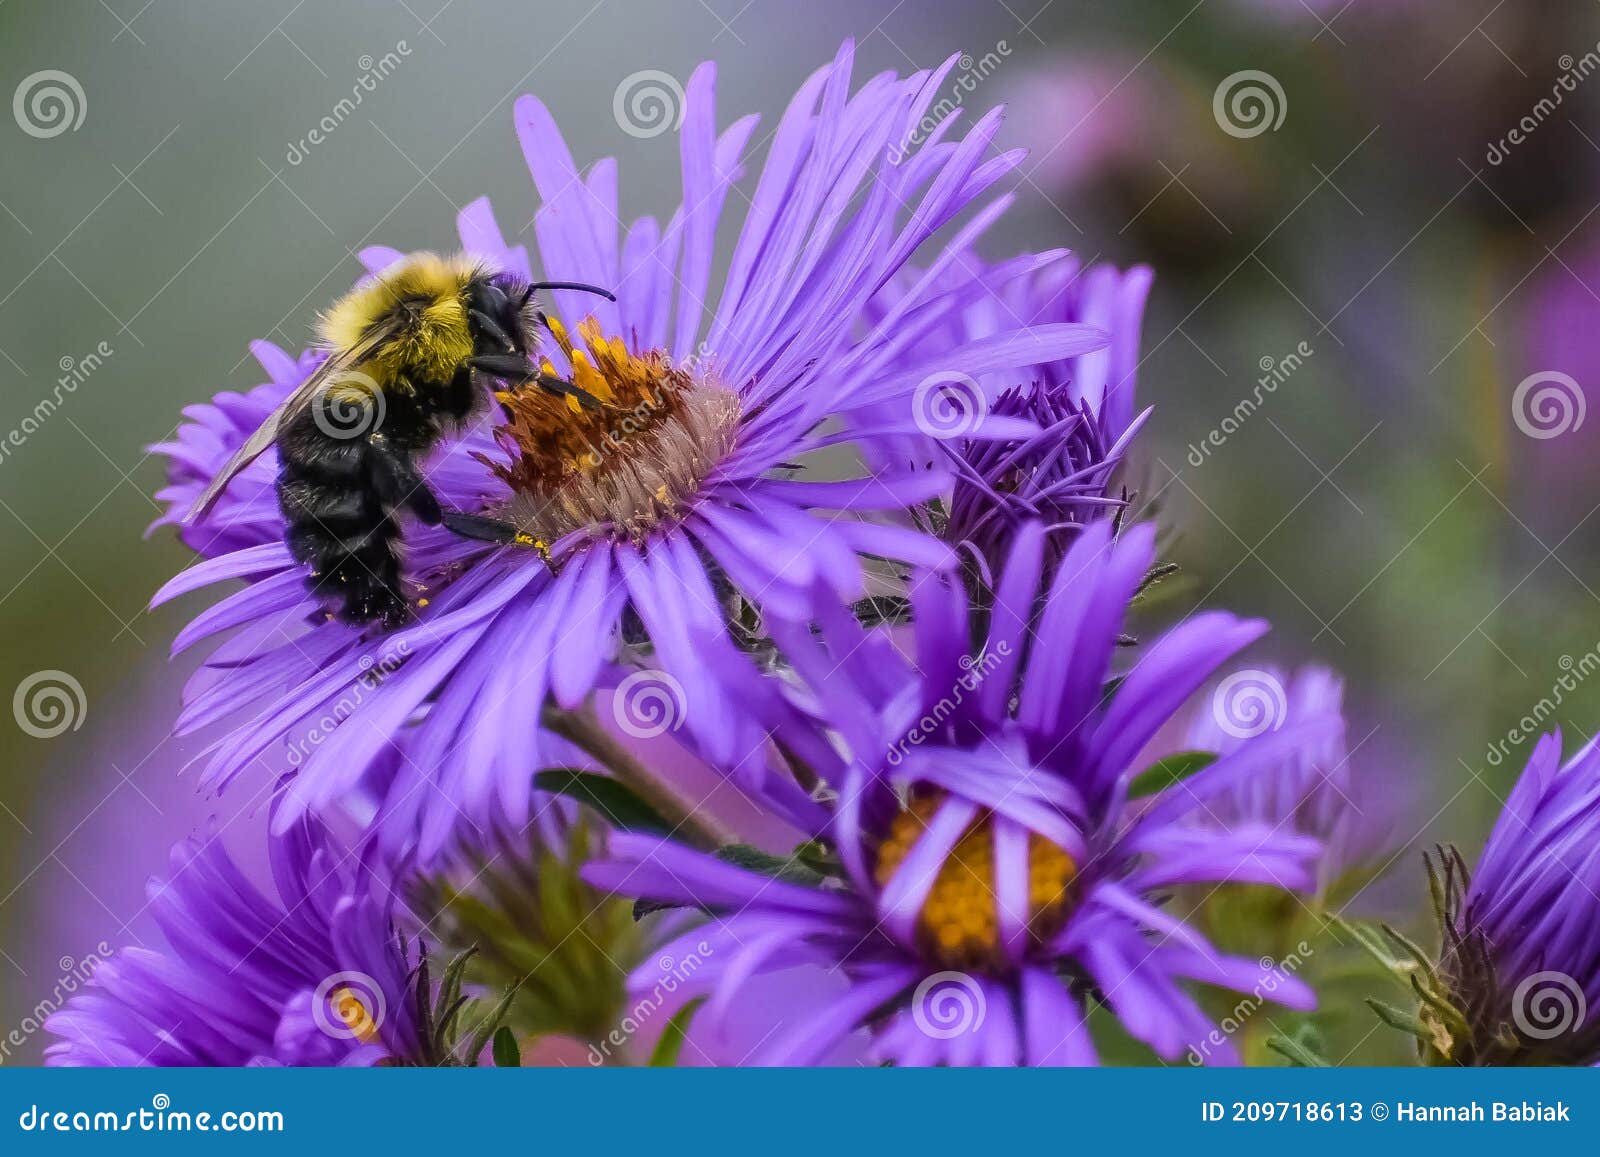 bumble bee on purple asters with yellow centers